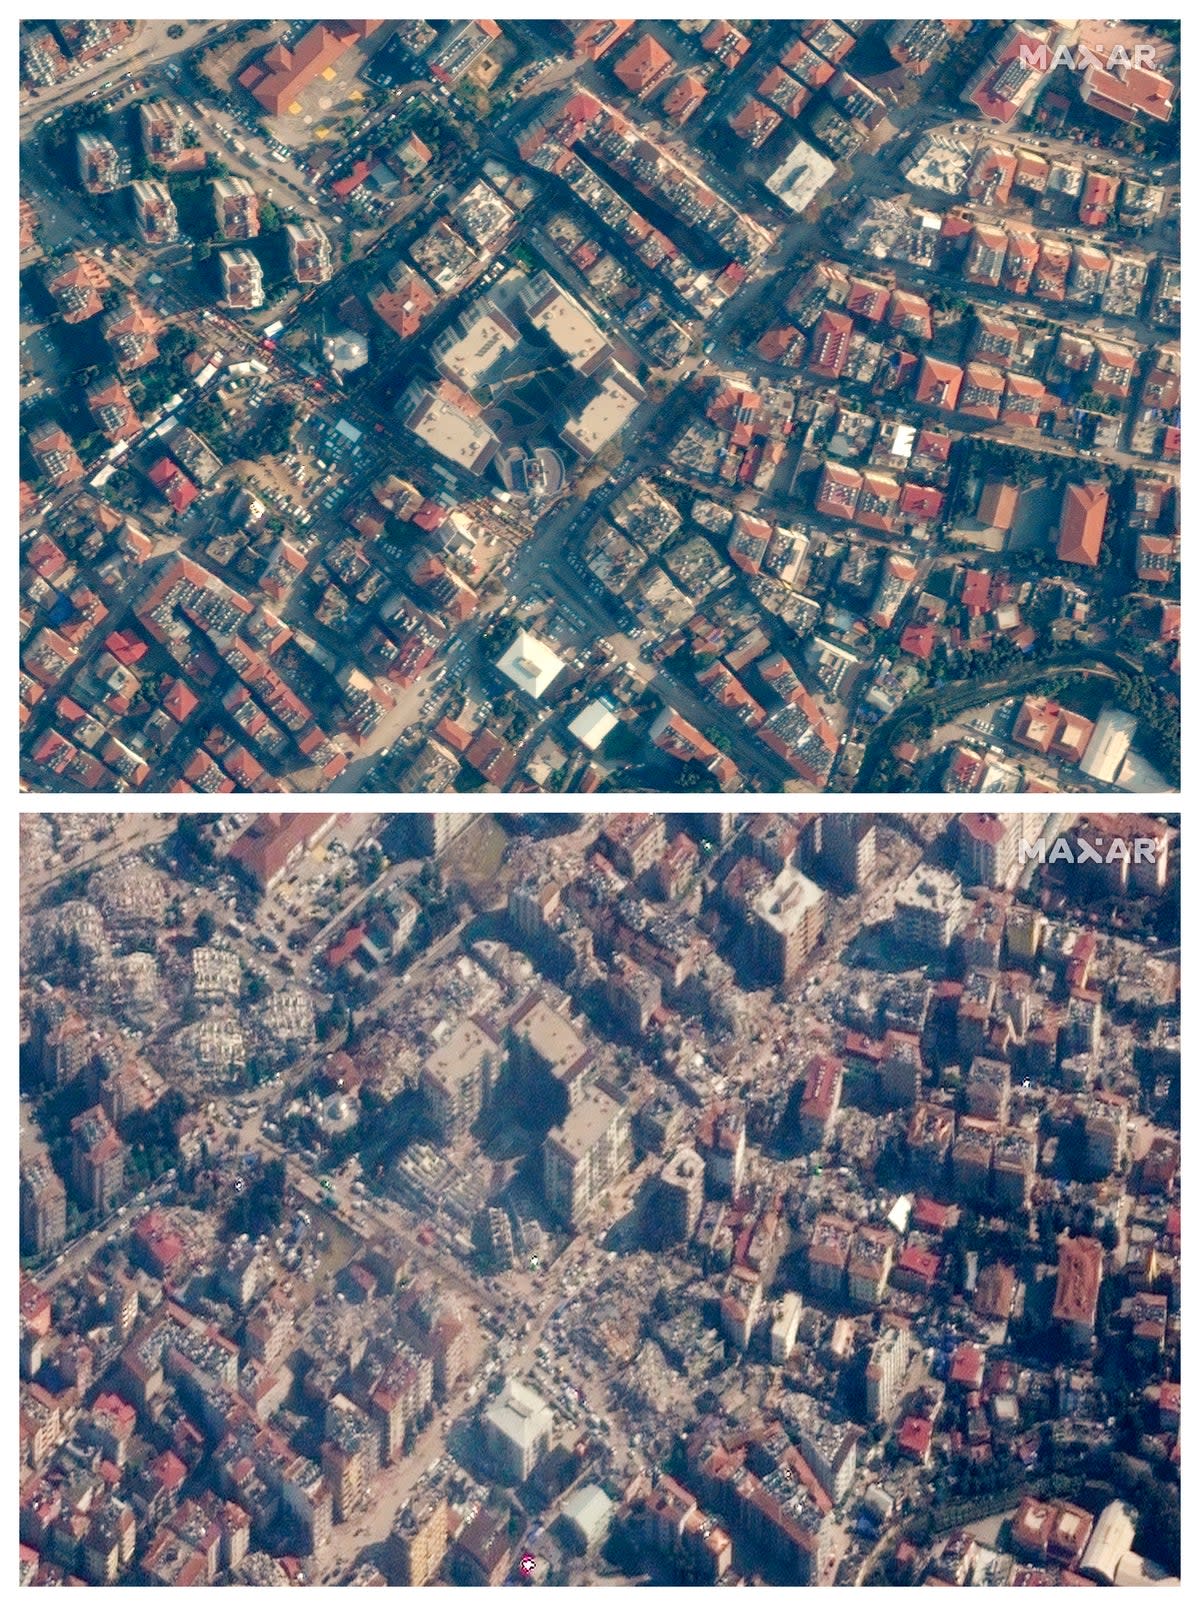 Buildings in Antakya, Turkey, before and after a powerful earthquake struck the regio (AP)